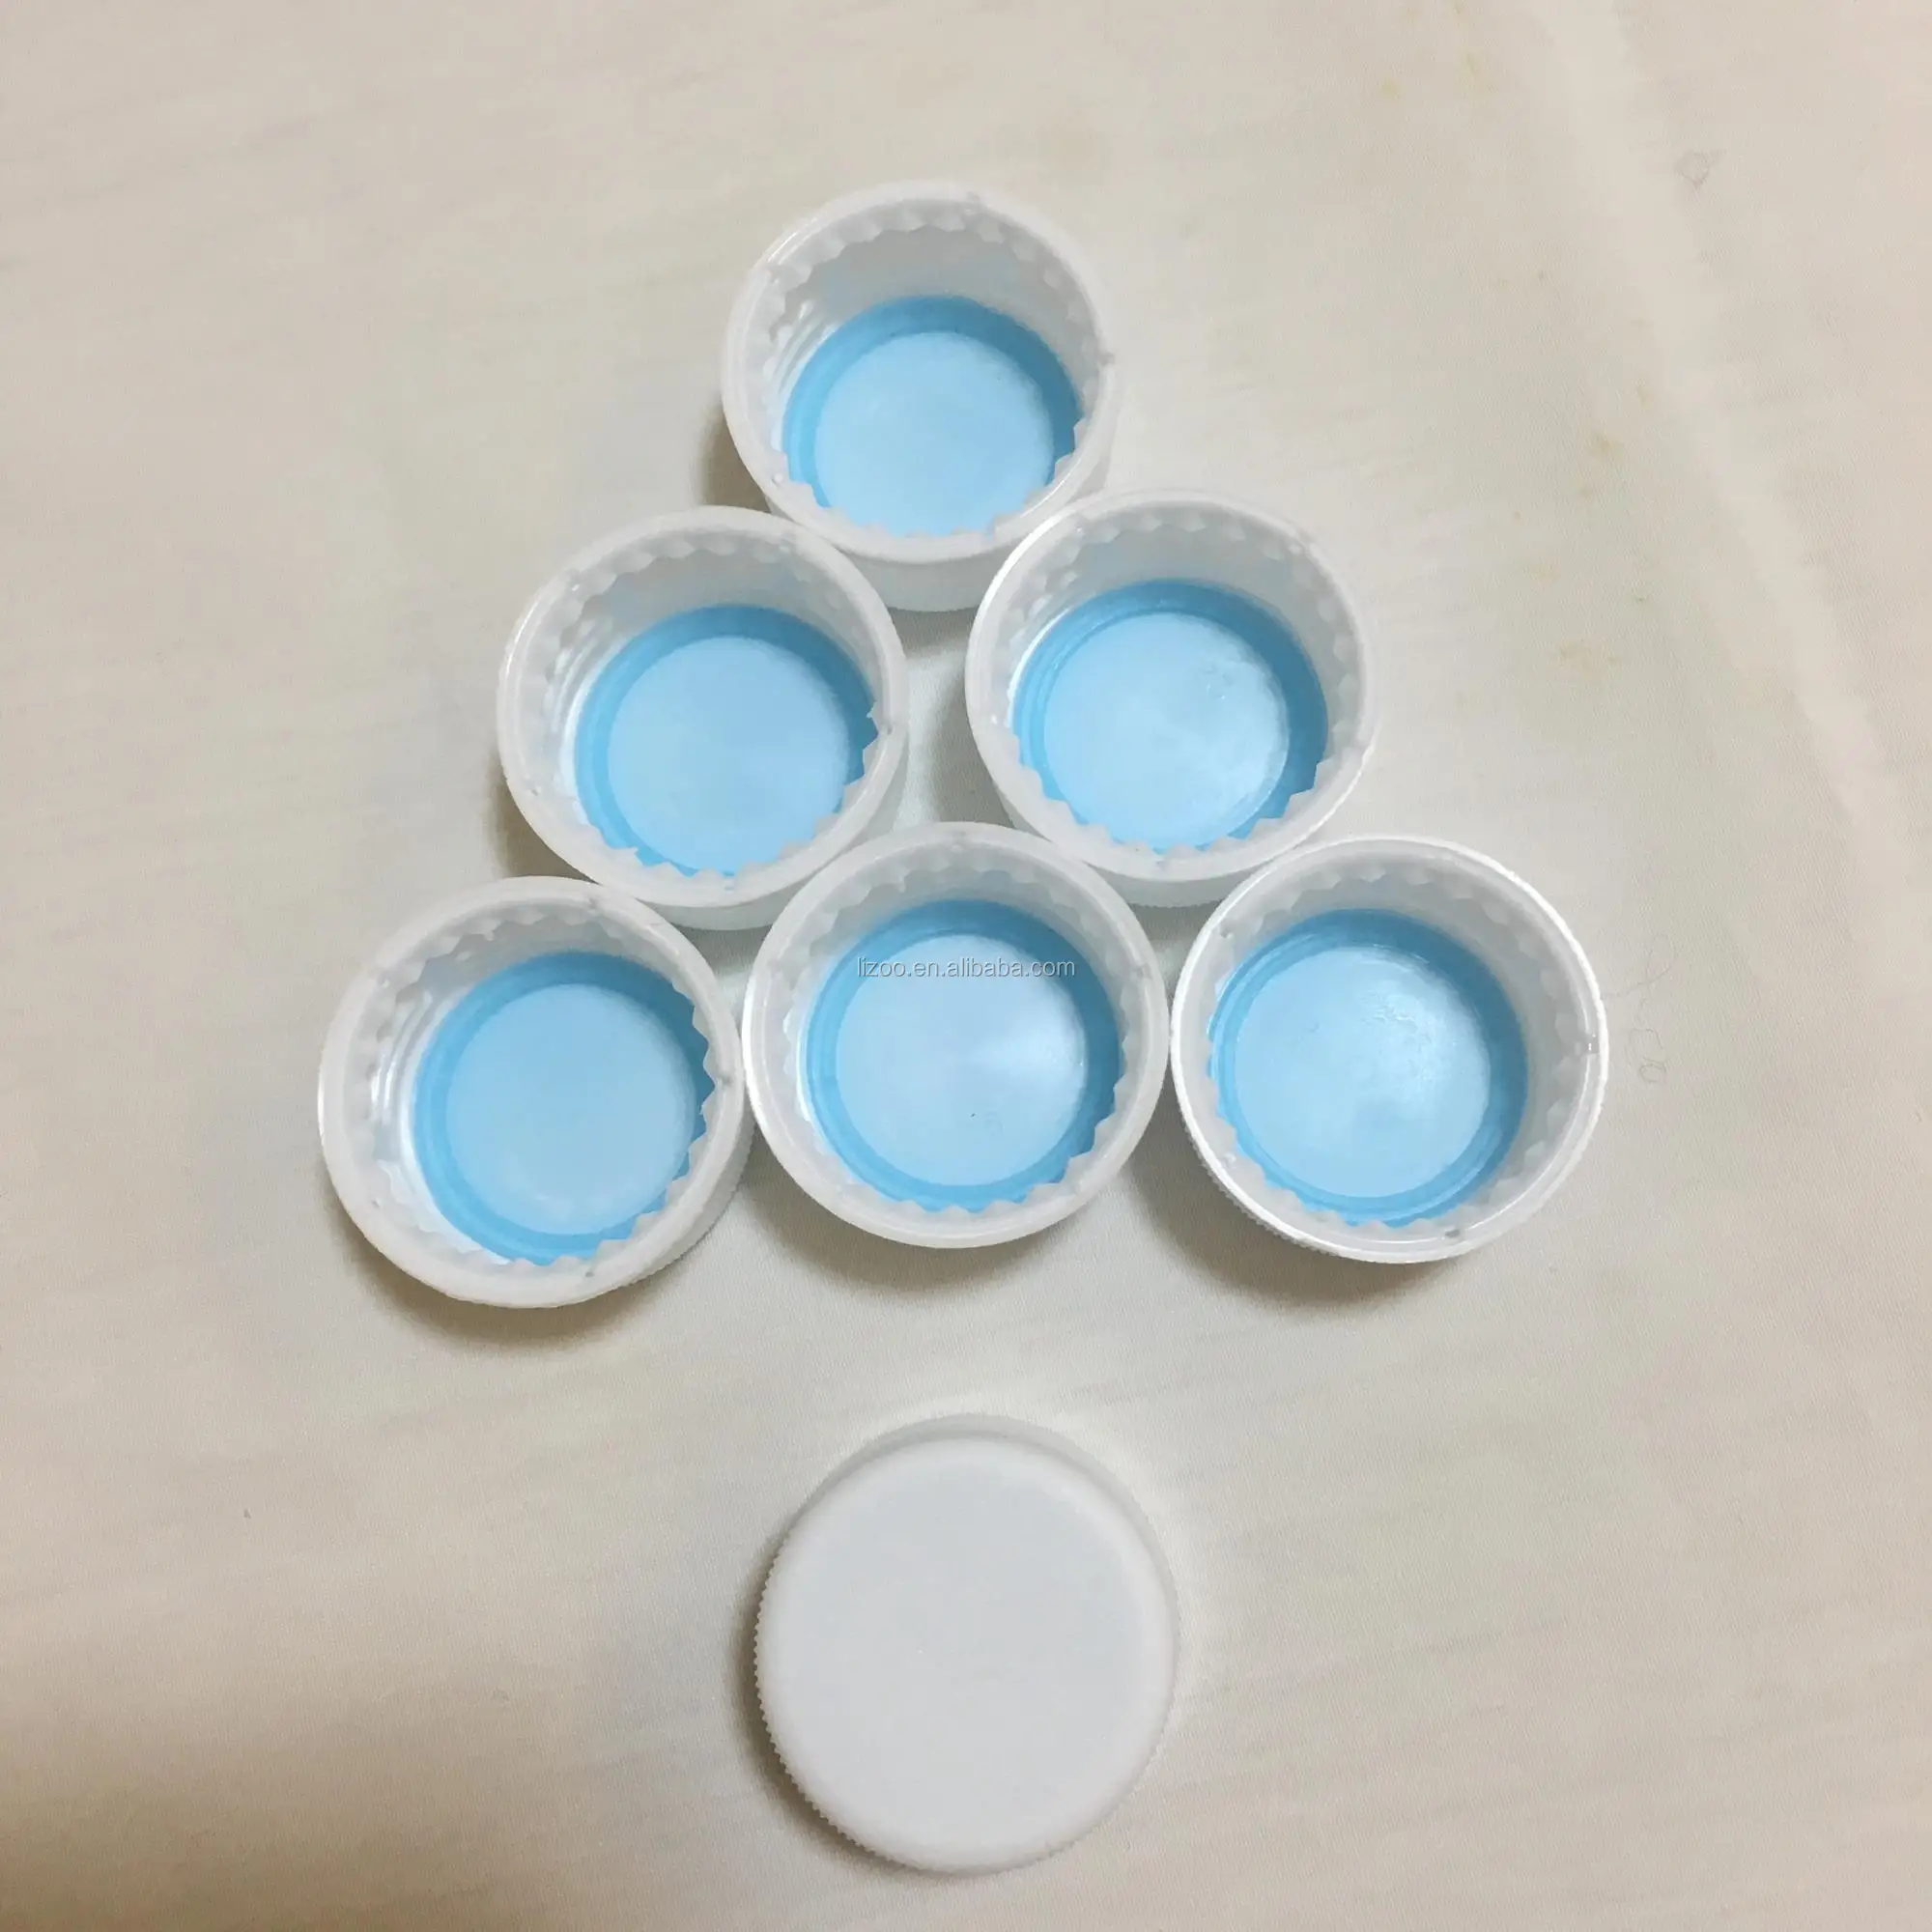 28mm Plastic Screw Caps For Pet Bottle sneaky Alcohol Caps Reseal Your